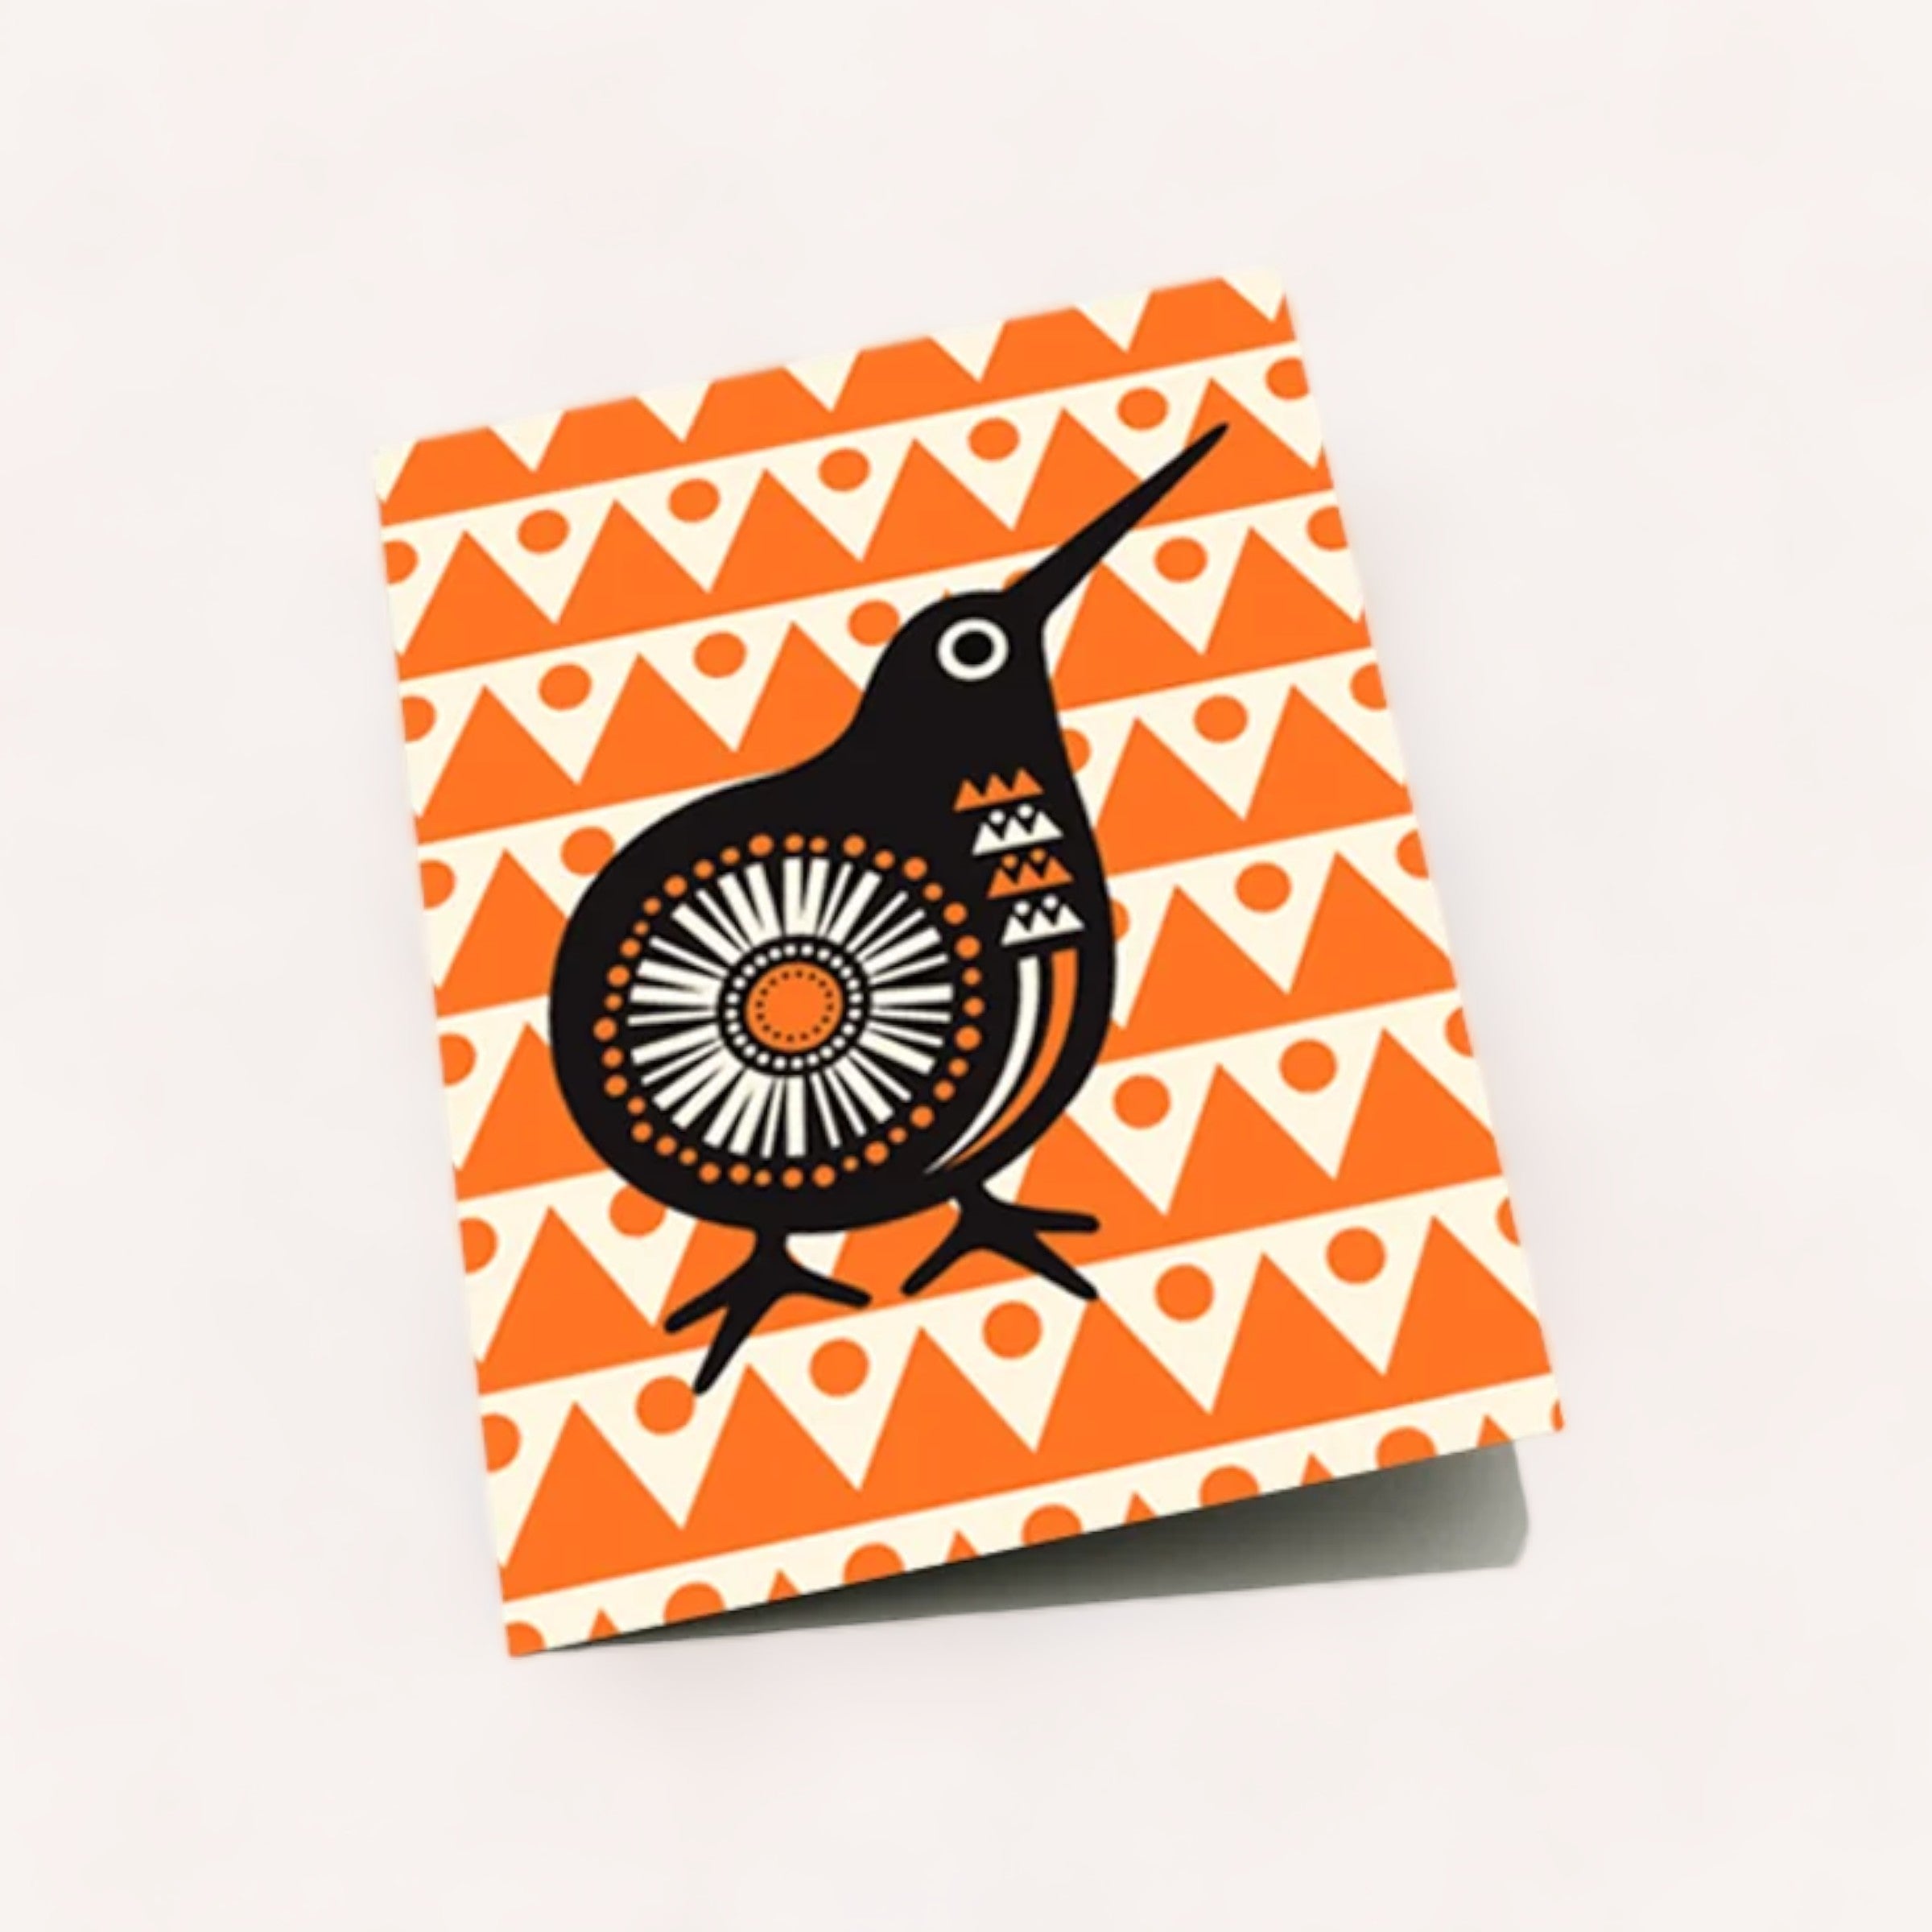 A Retro Kiwi Card with a vibrant geometric pattern and a stylized bird illustration on its cover, set against a light background. Product of New Zealand.